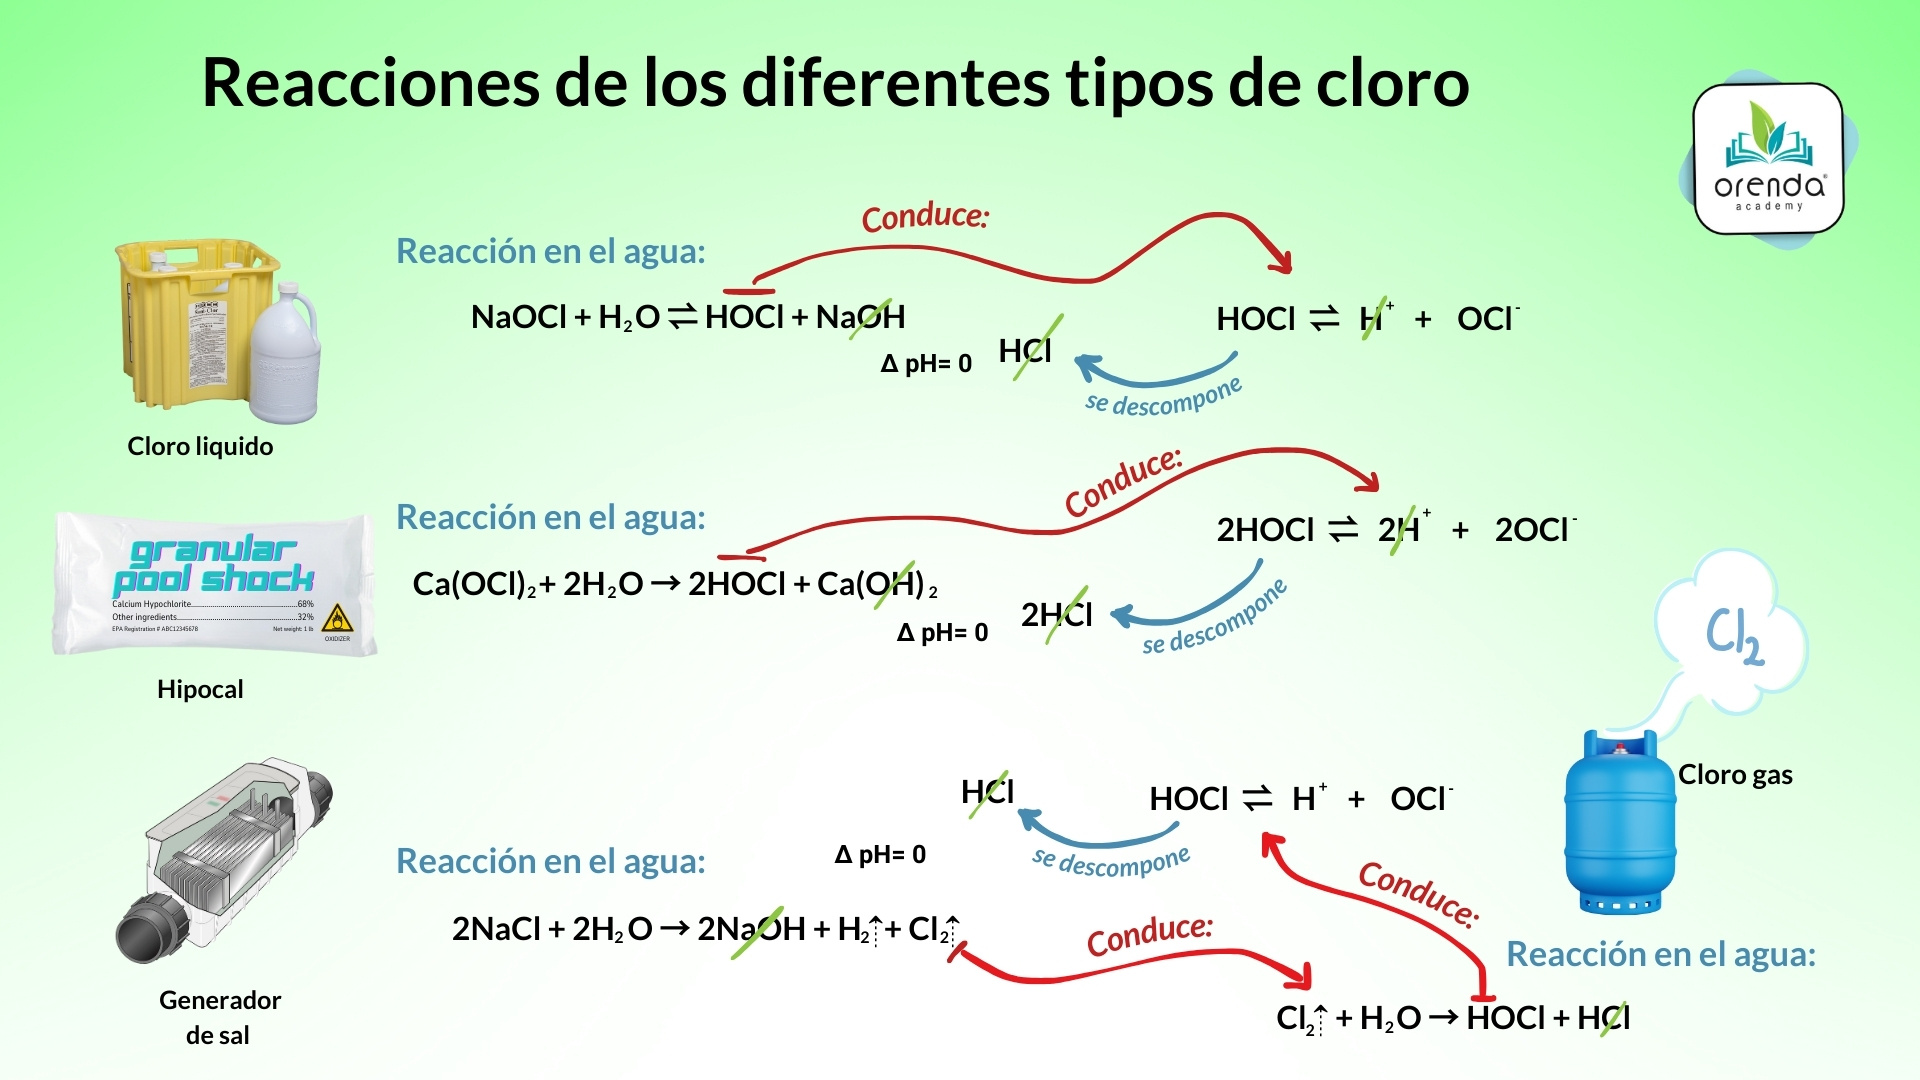 Self neutralization of the different types of chlorine (spanish)